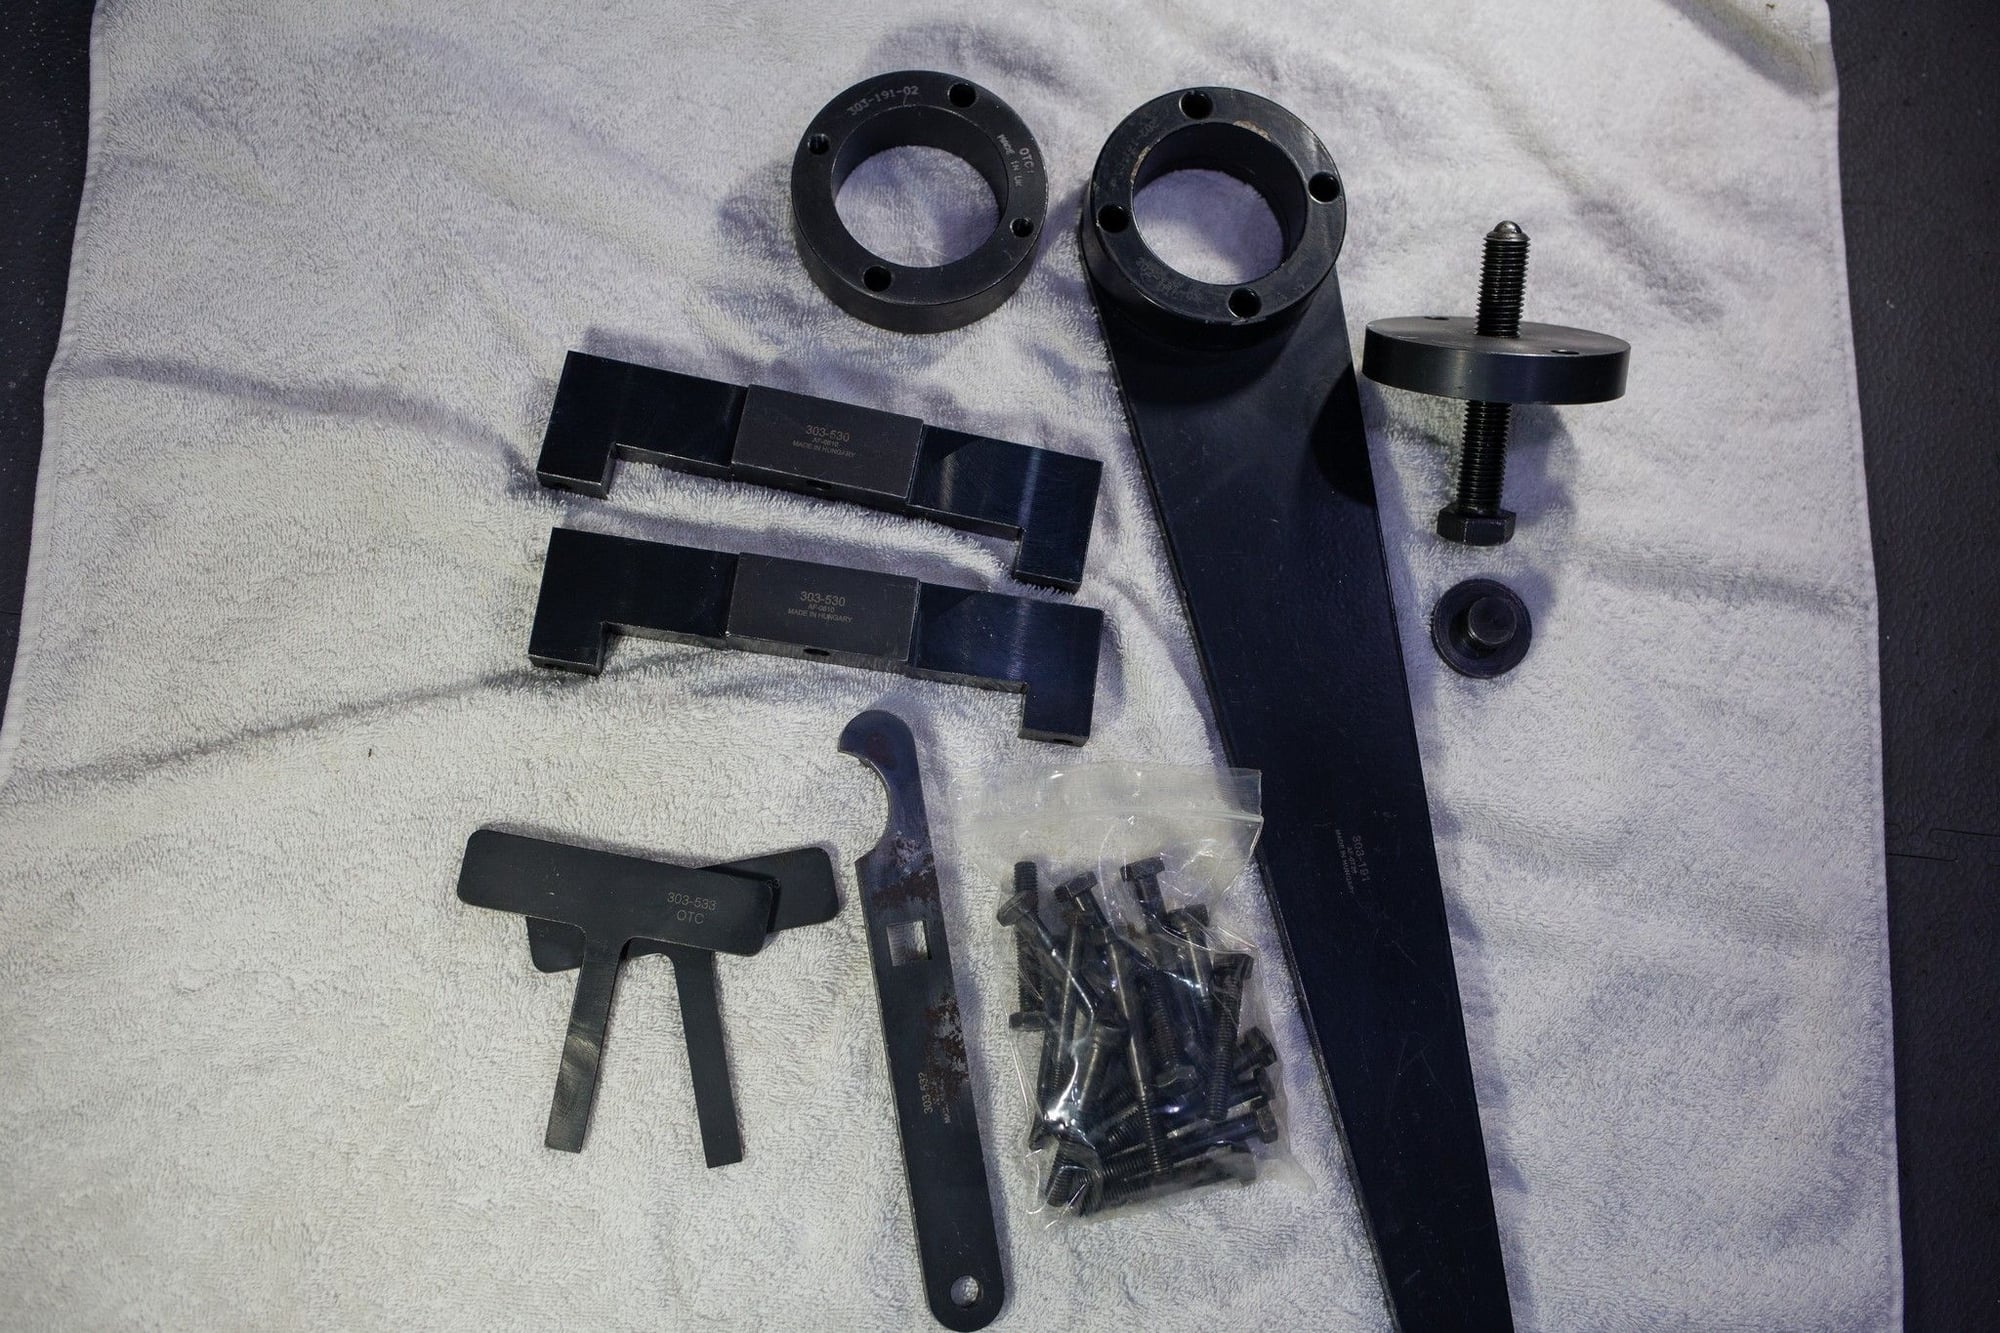 Accessories - Jaguar Tools for Sale - Used - Manchester M41, United Kingdom